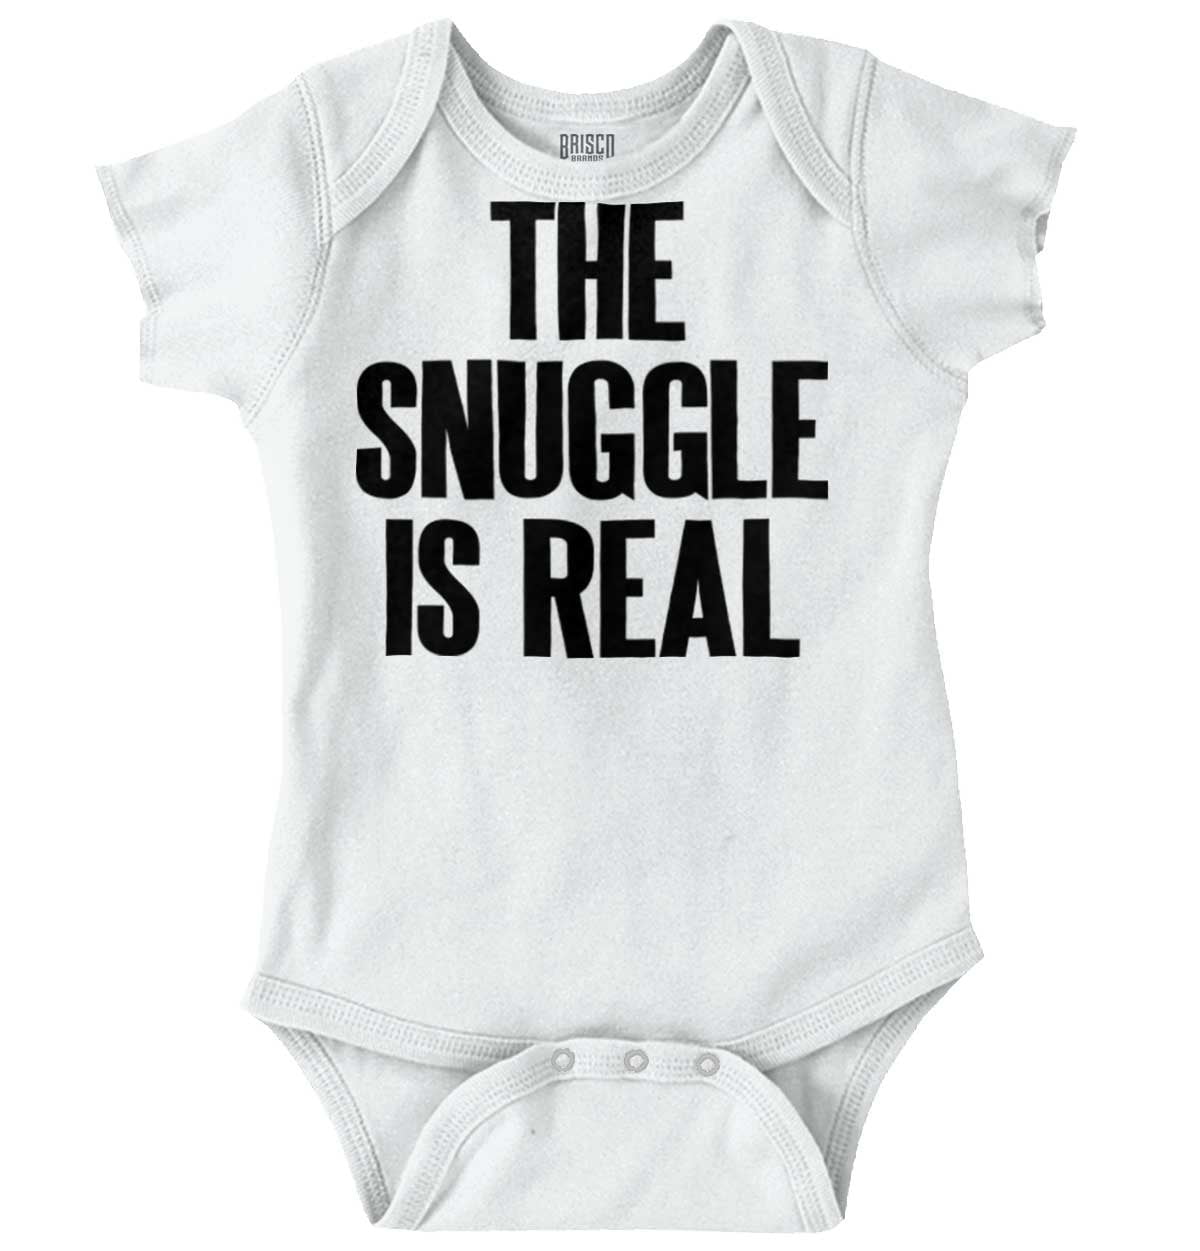 THE SNUGGLE IS REAL boy love Baby grow BABY VEST / Bodysuit funny cuddle cute 